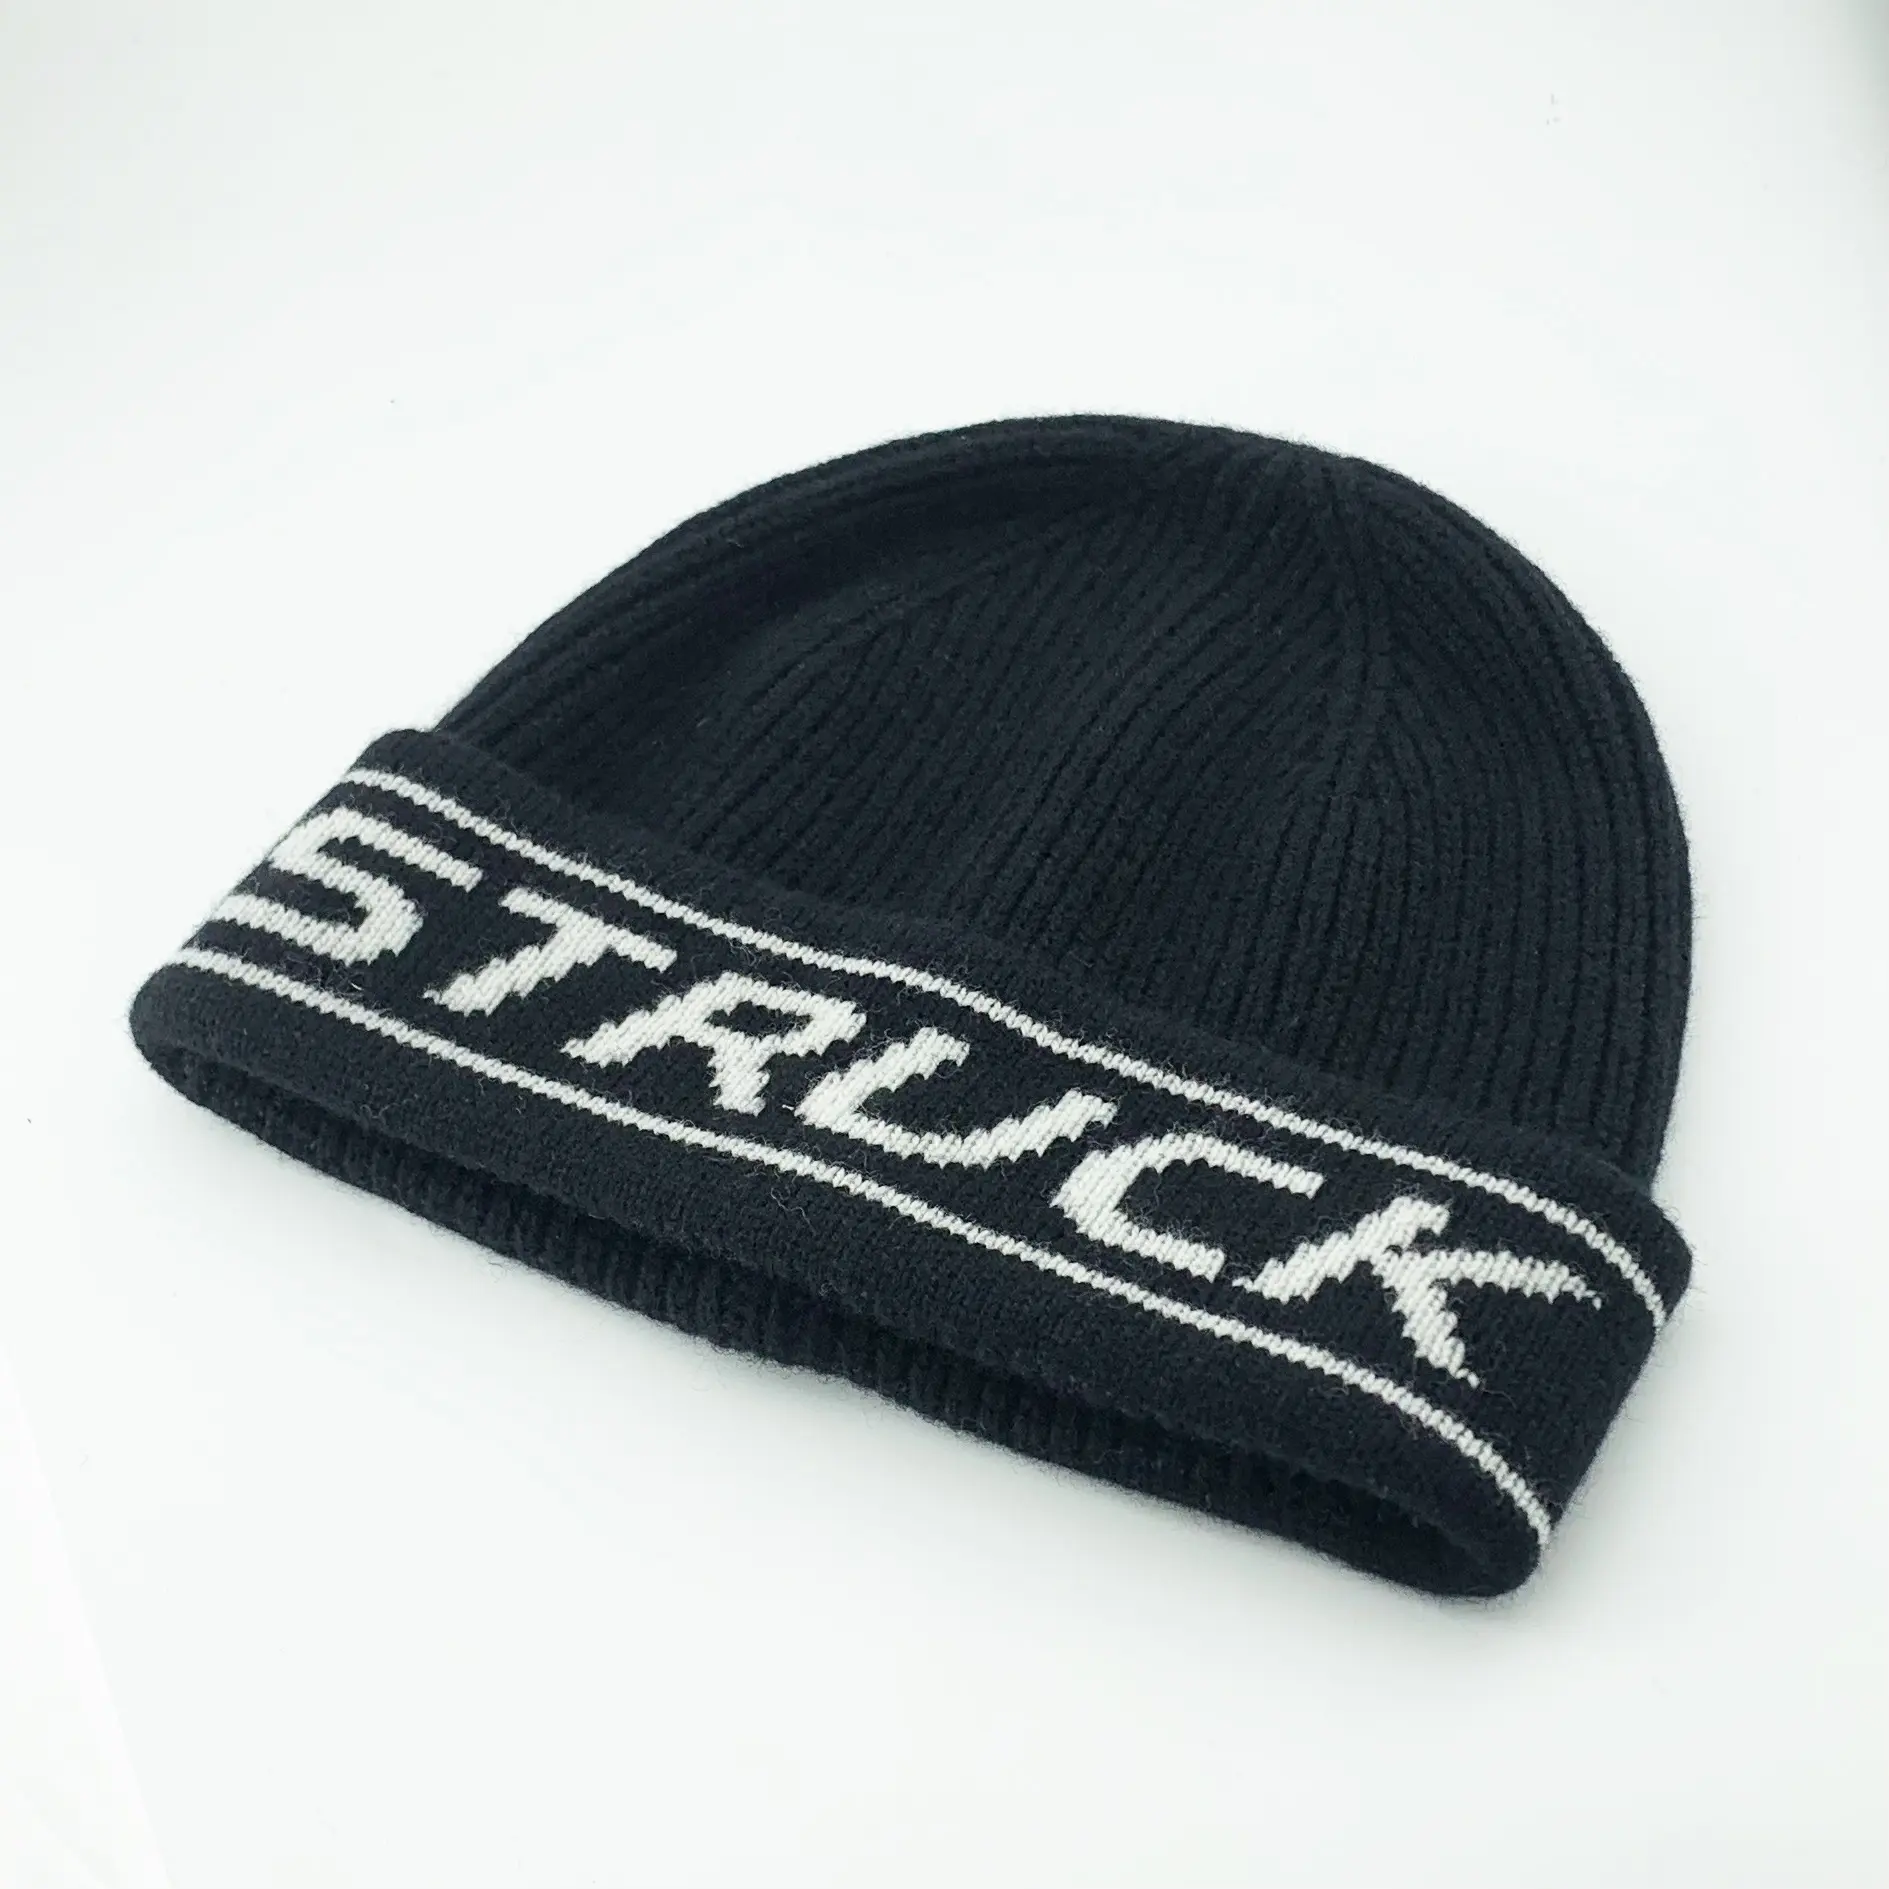 2023 High Quality Beanies Hats Tuque Black Acrylic Big Ribbed Letters Jacquard Unisex Winter Sport Knit Acrylic Beanie Hat Cap